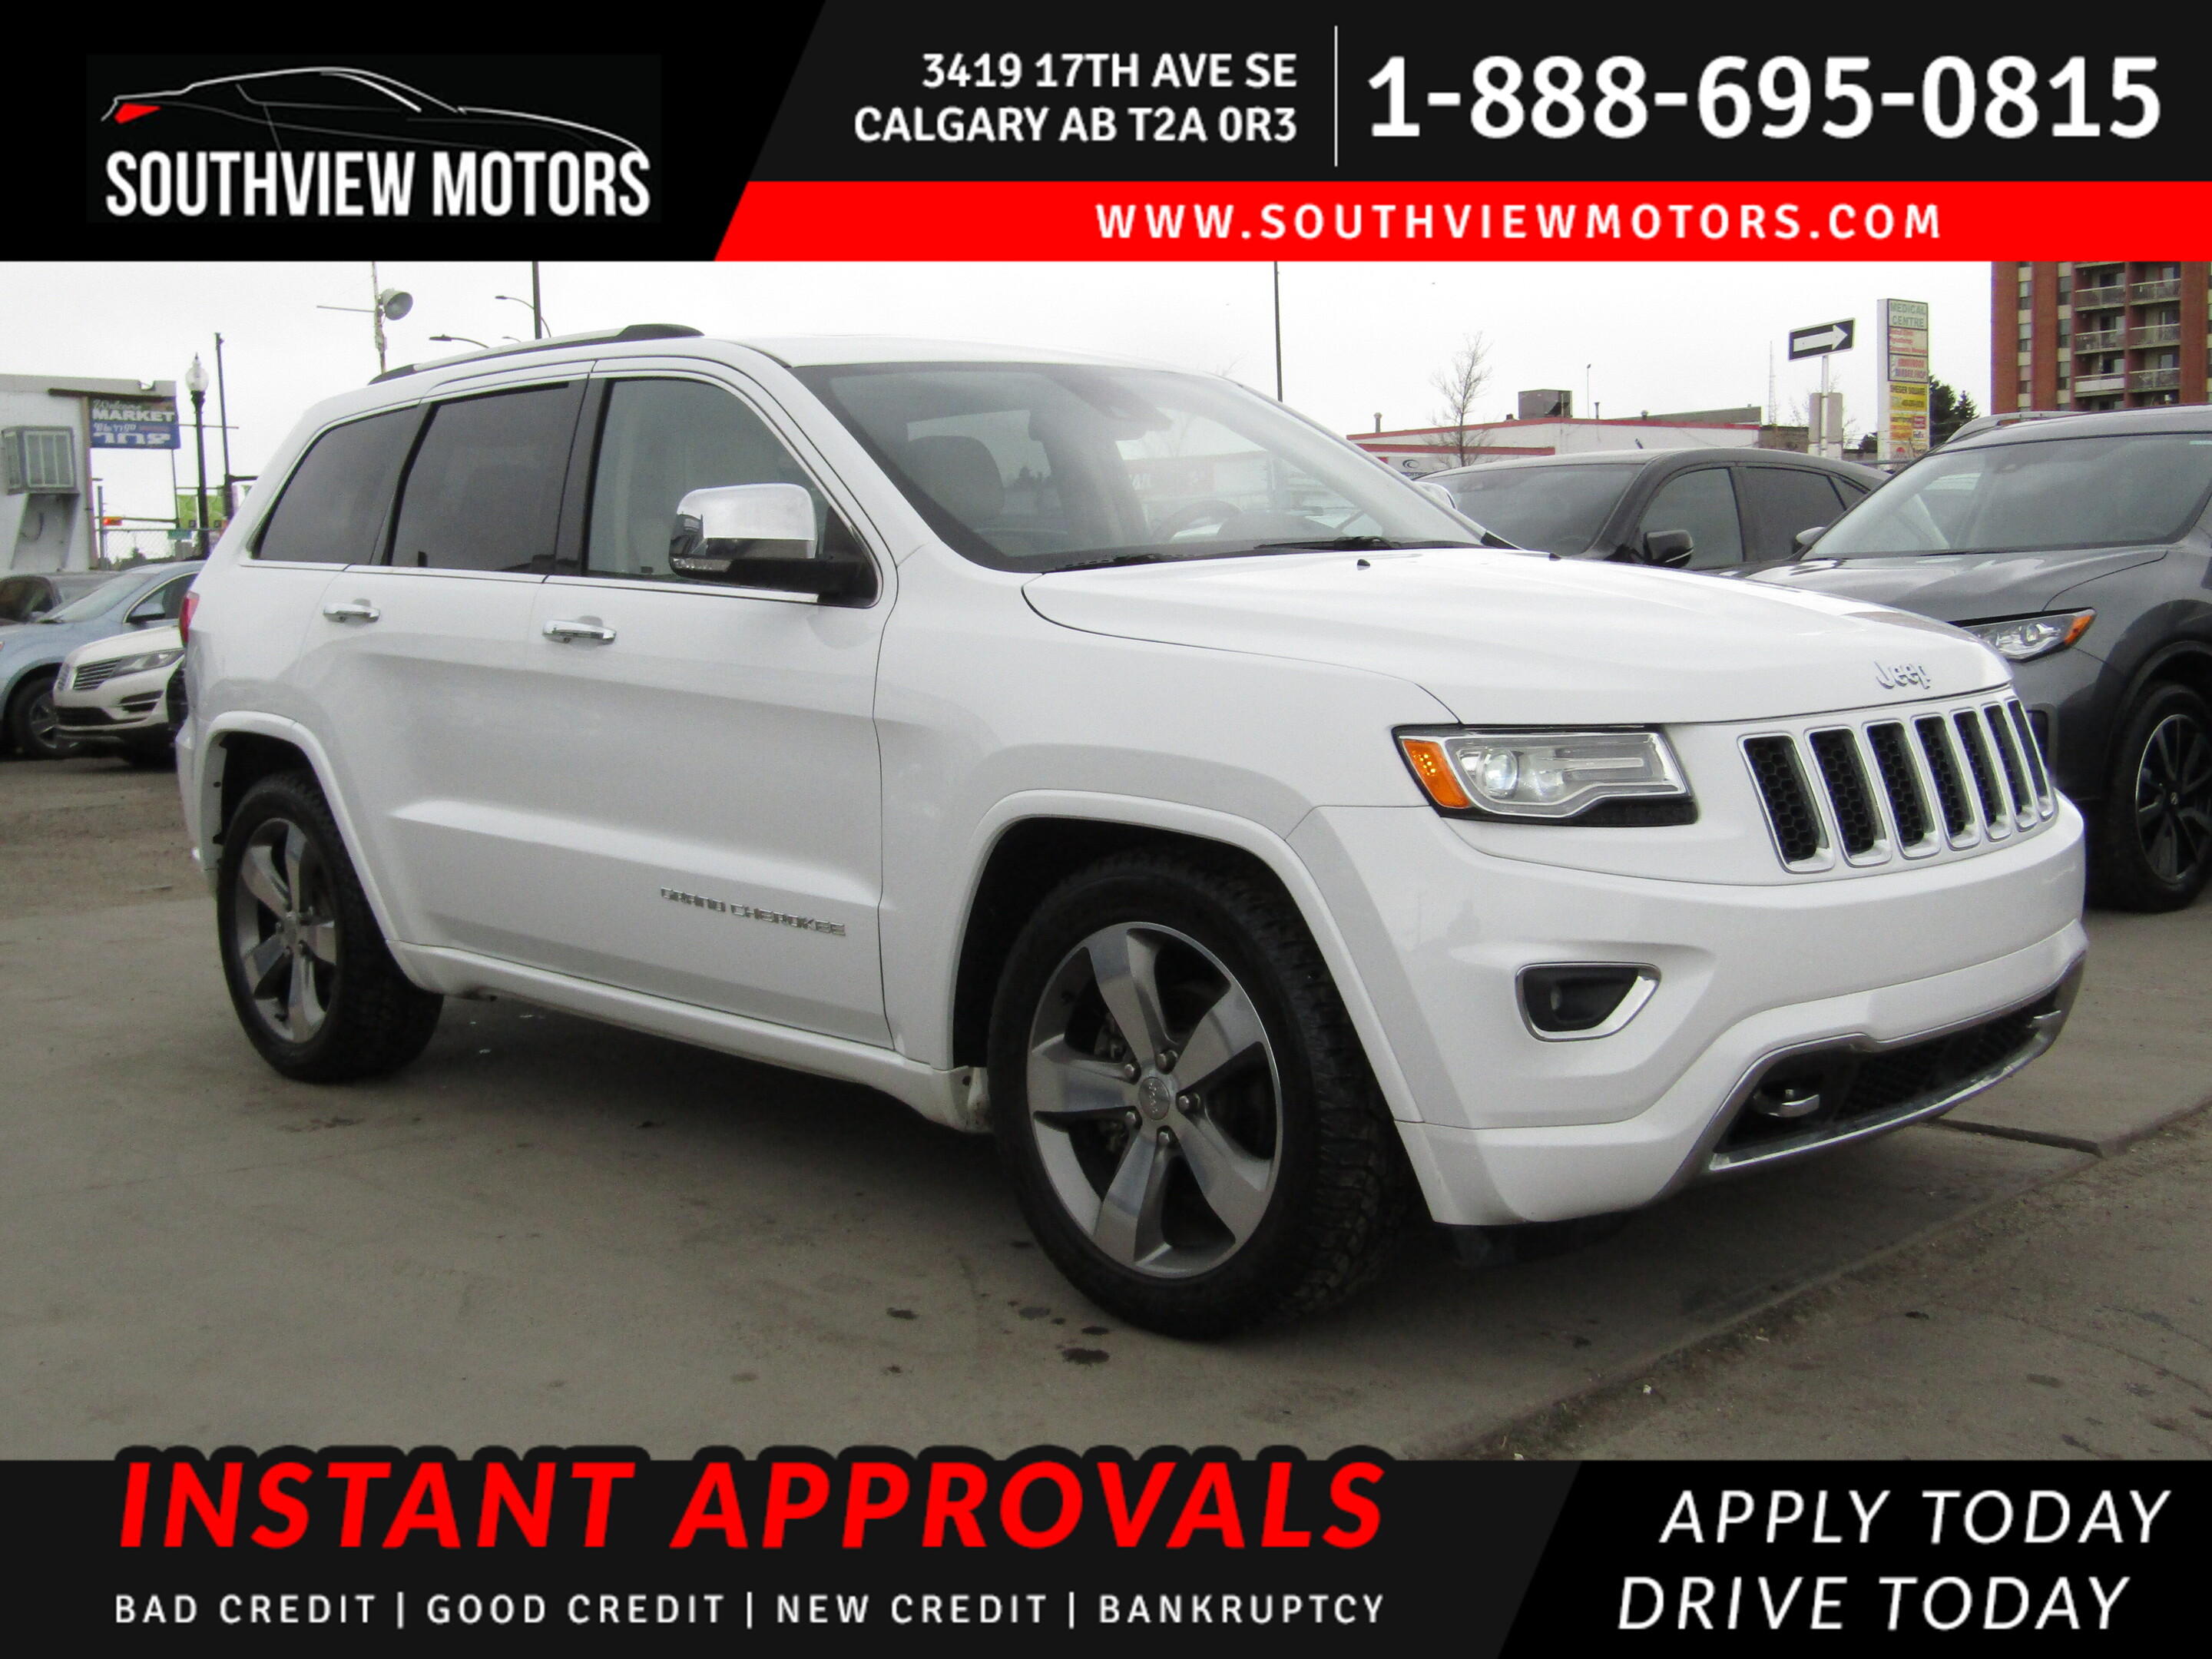 2015 Jeep Grand Cherokee OVERLAND 4WD V6 3.6L NAV/CAM/DVD/PANOROOF/LOADED!